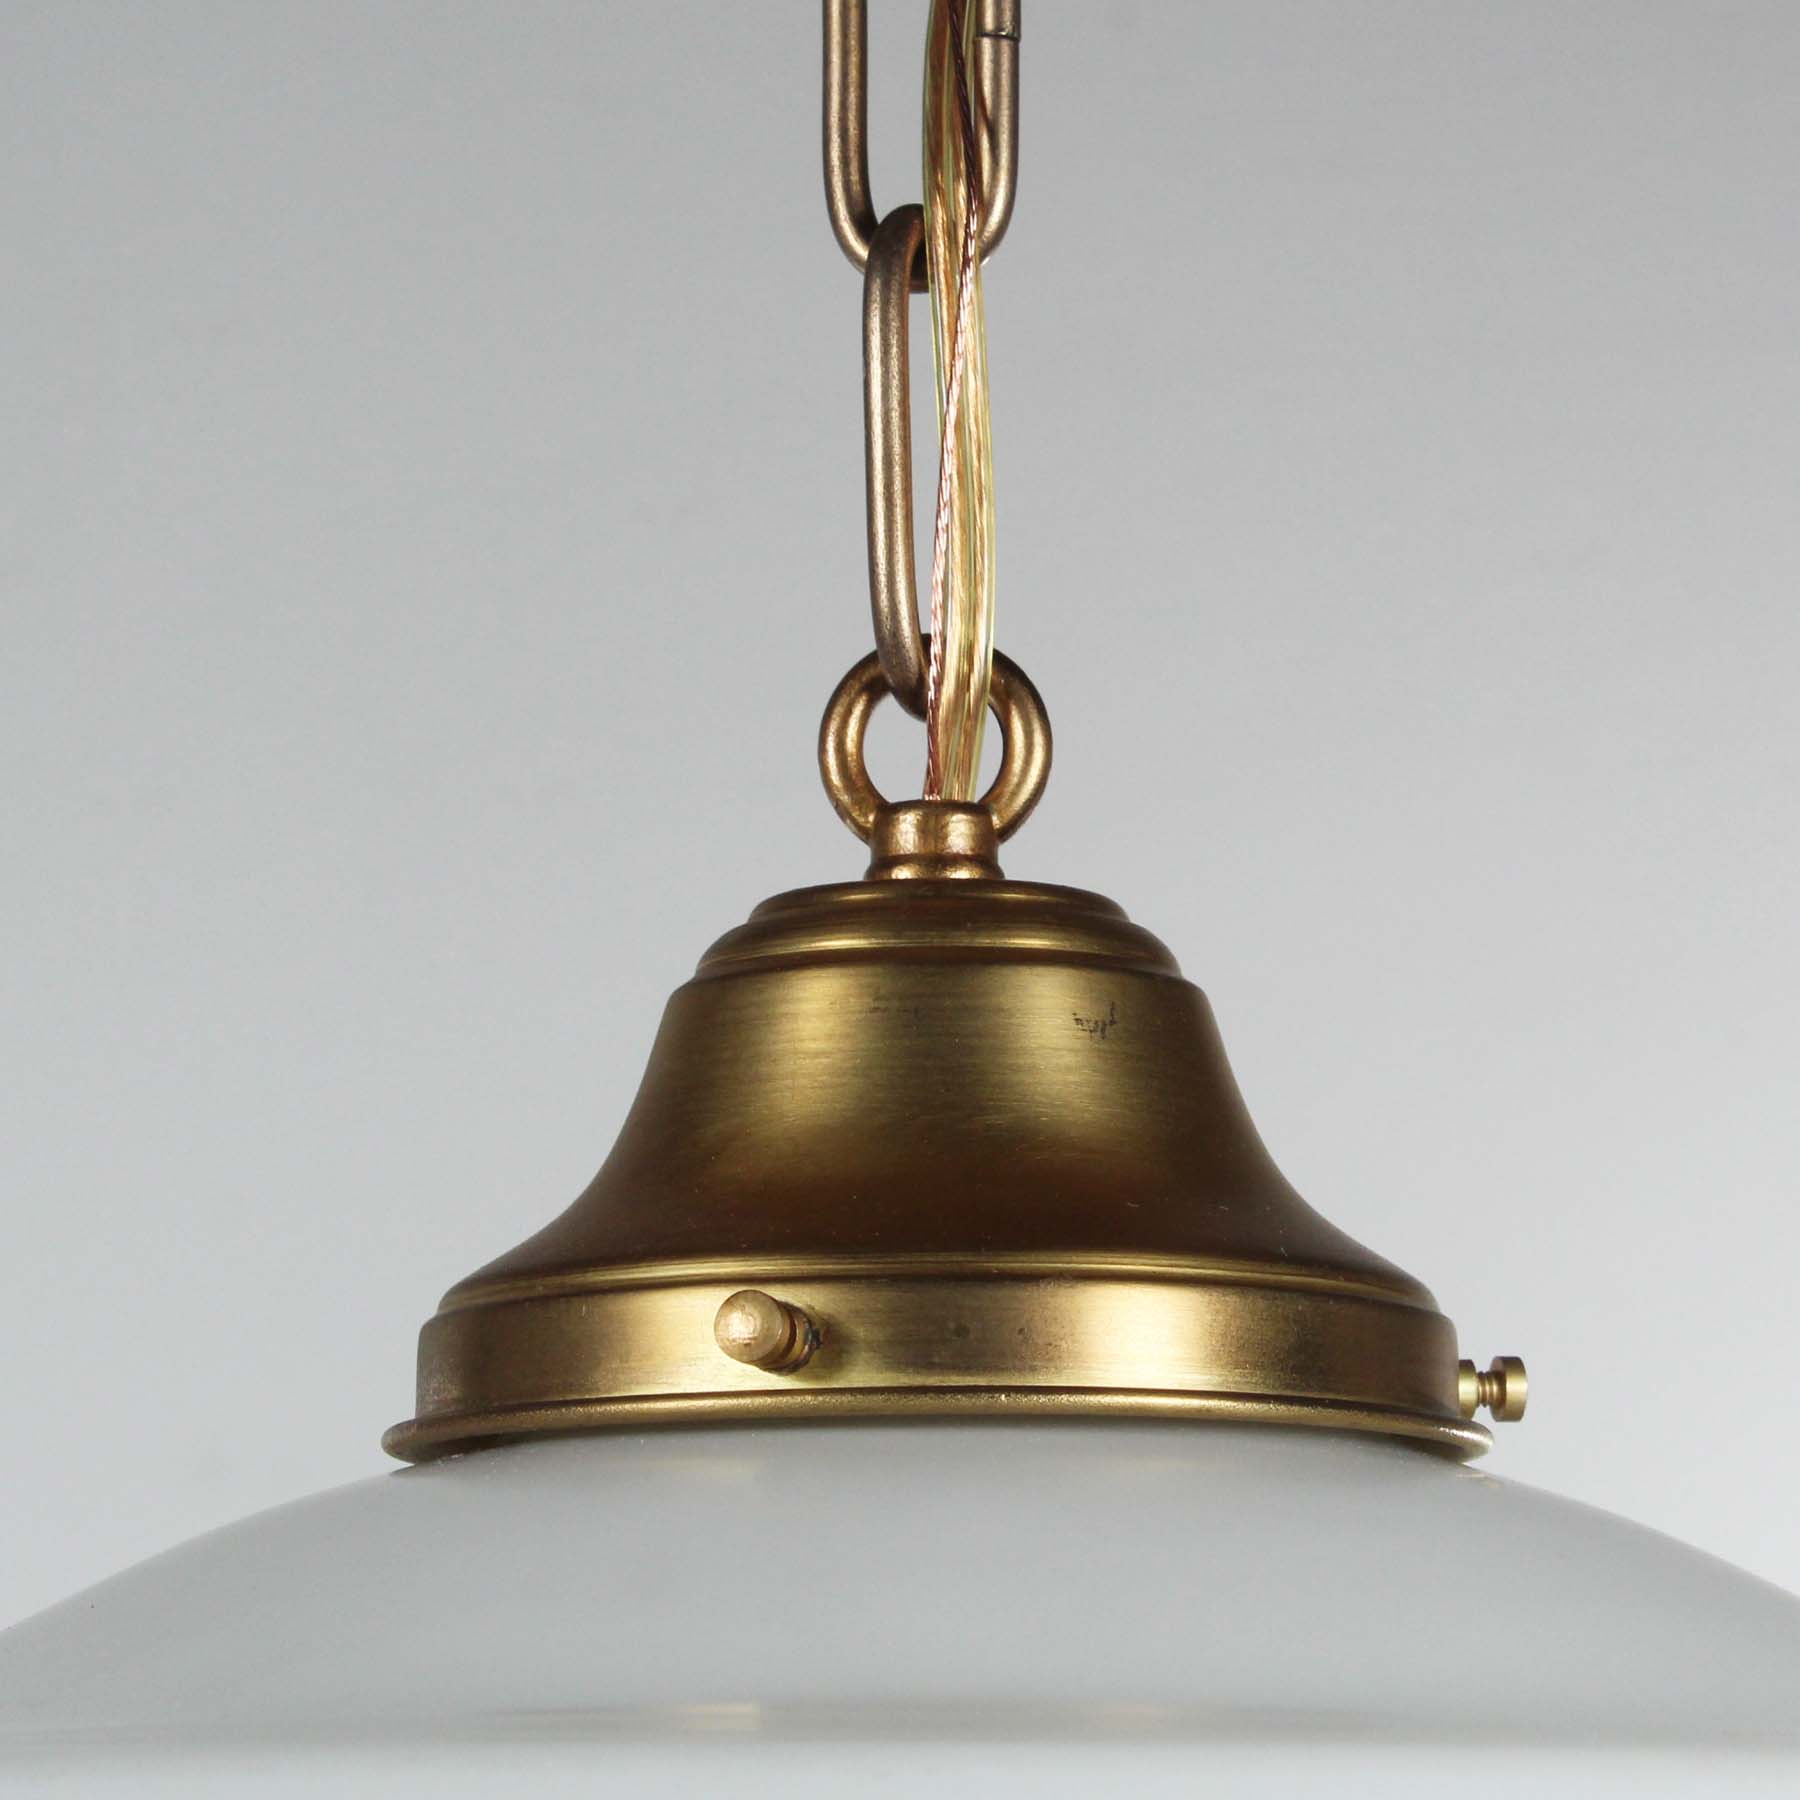 SOLD Neoclassical Pendant Lights with Acid Cut-Back Shades, Antique Lighting-71252